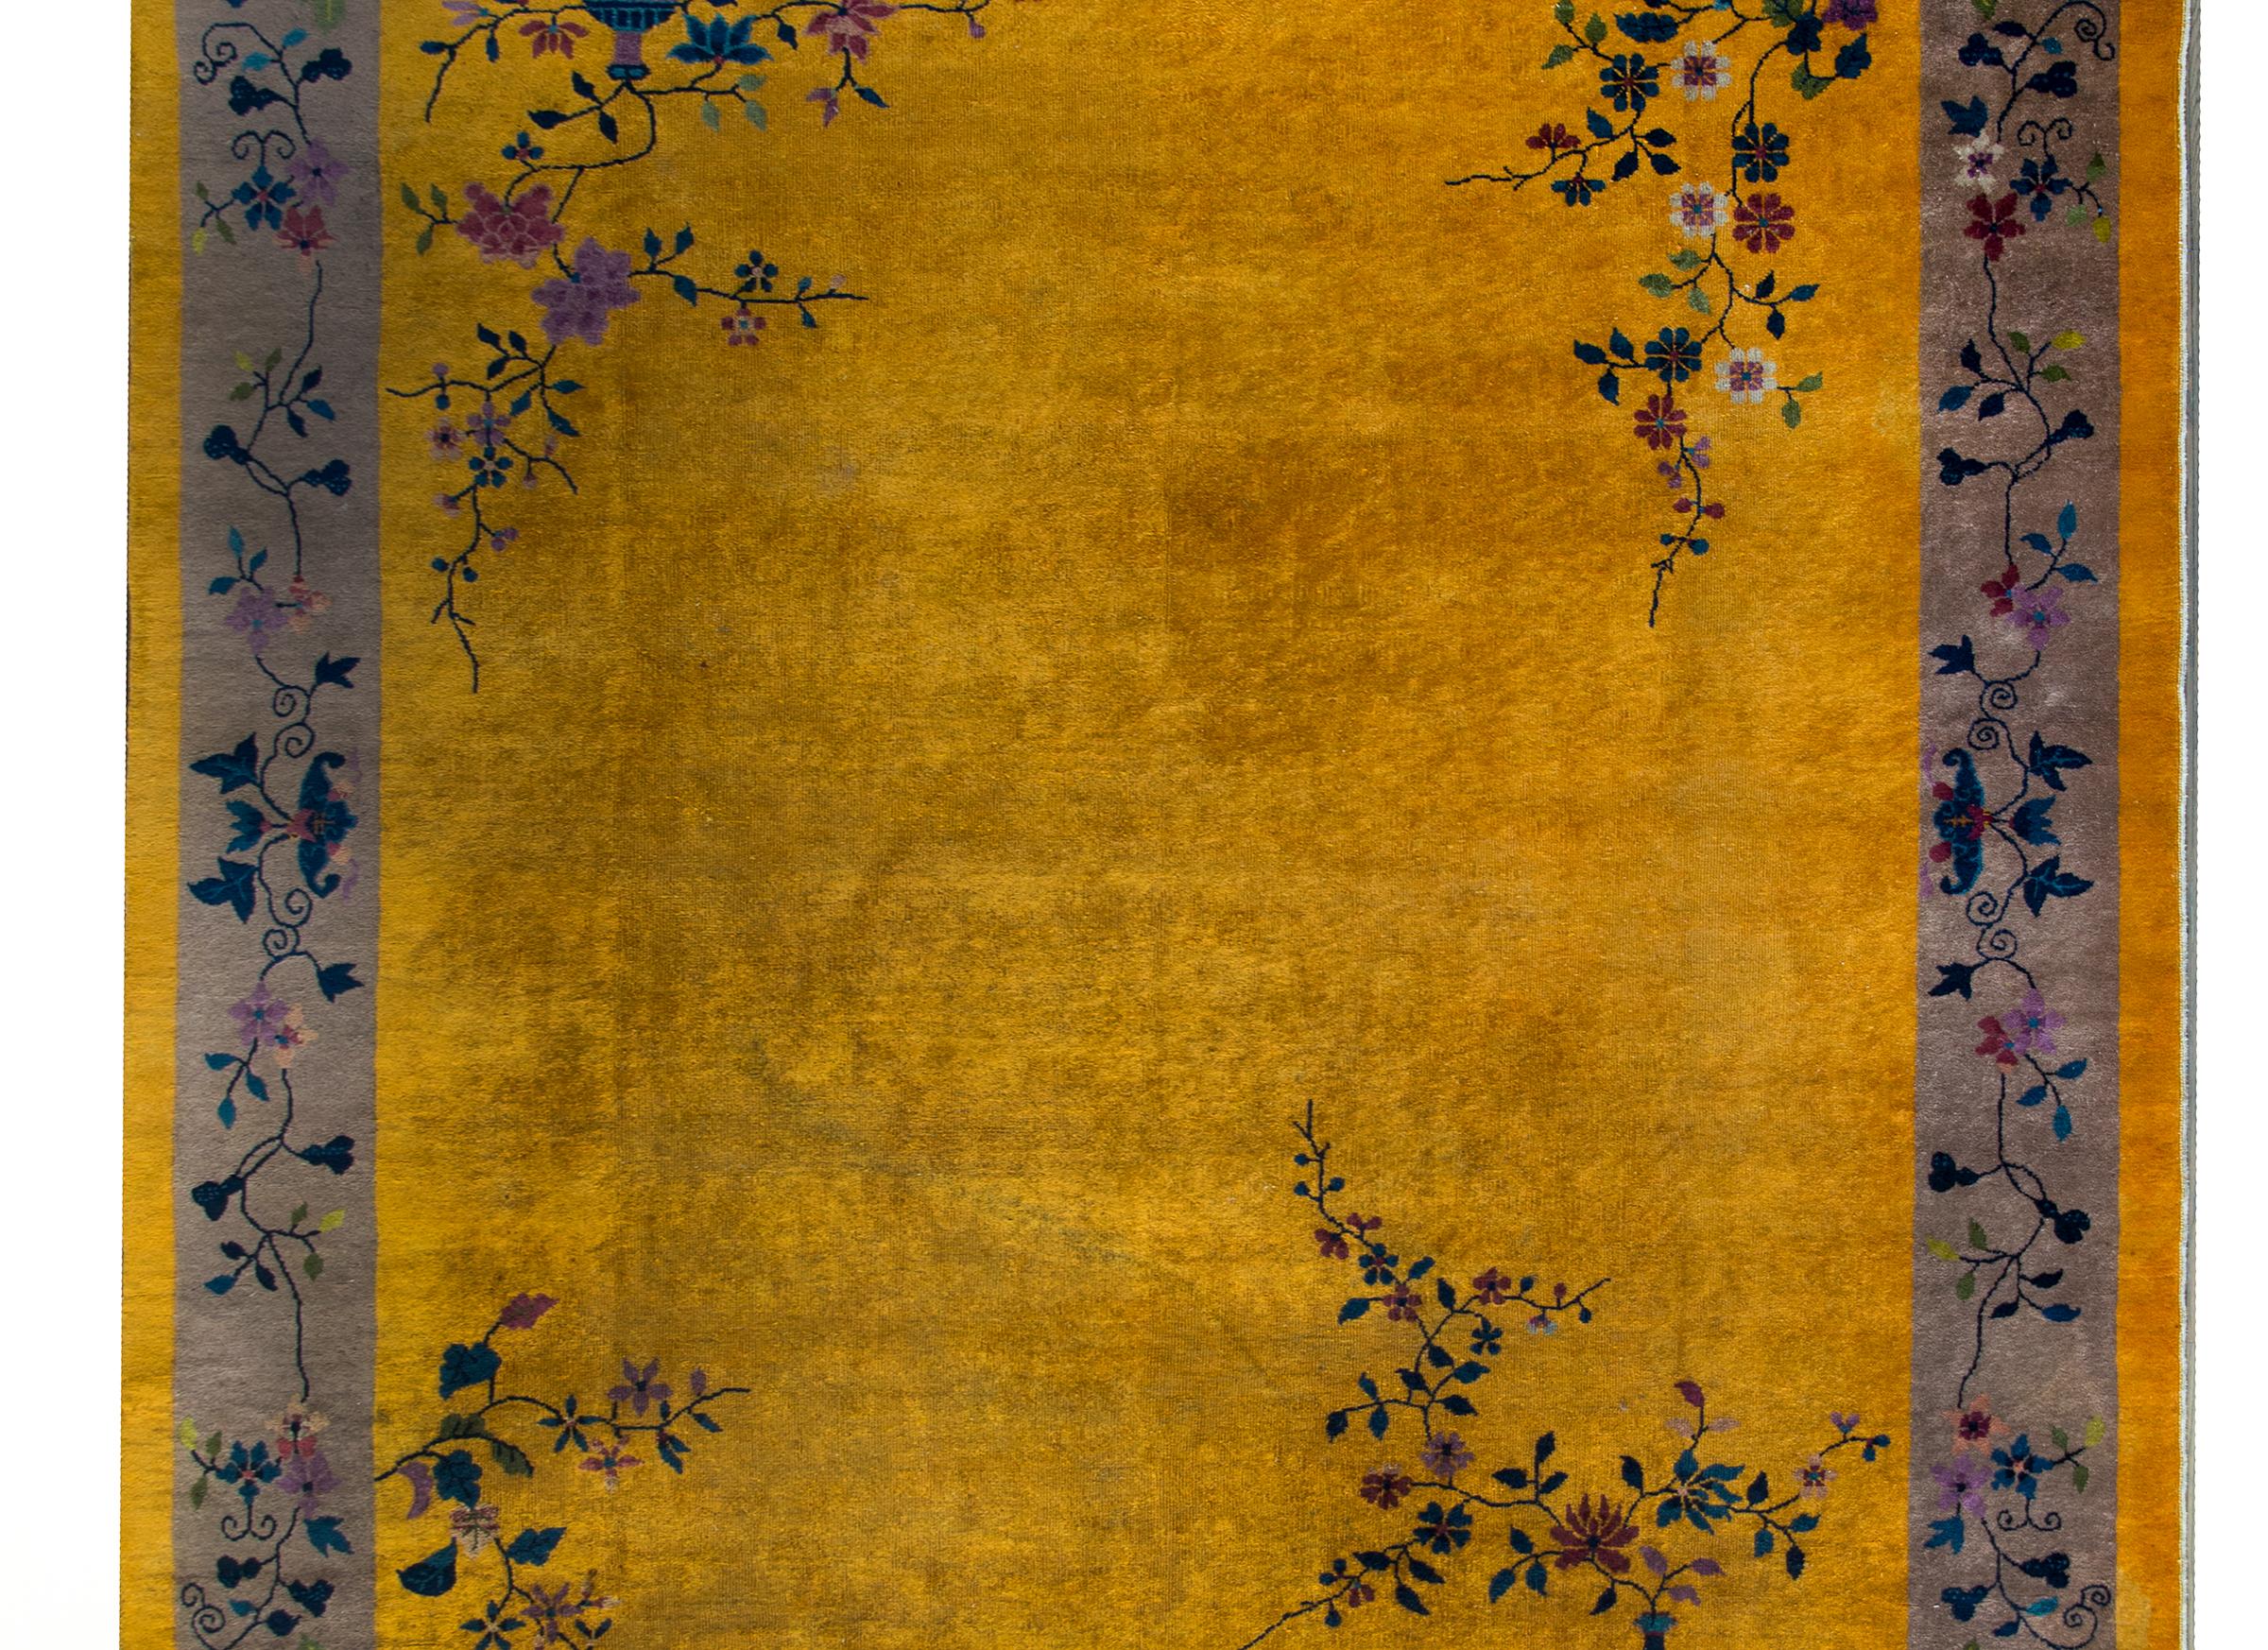 A beautiful early 20th century Chinese Art Deco rug with a deep gold field surrounded by a wide gray stripe border, with vases potted with violet and indigo chrysanthemum and prunus blossoms, and the border with a simple but chic scrolling vine and